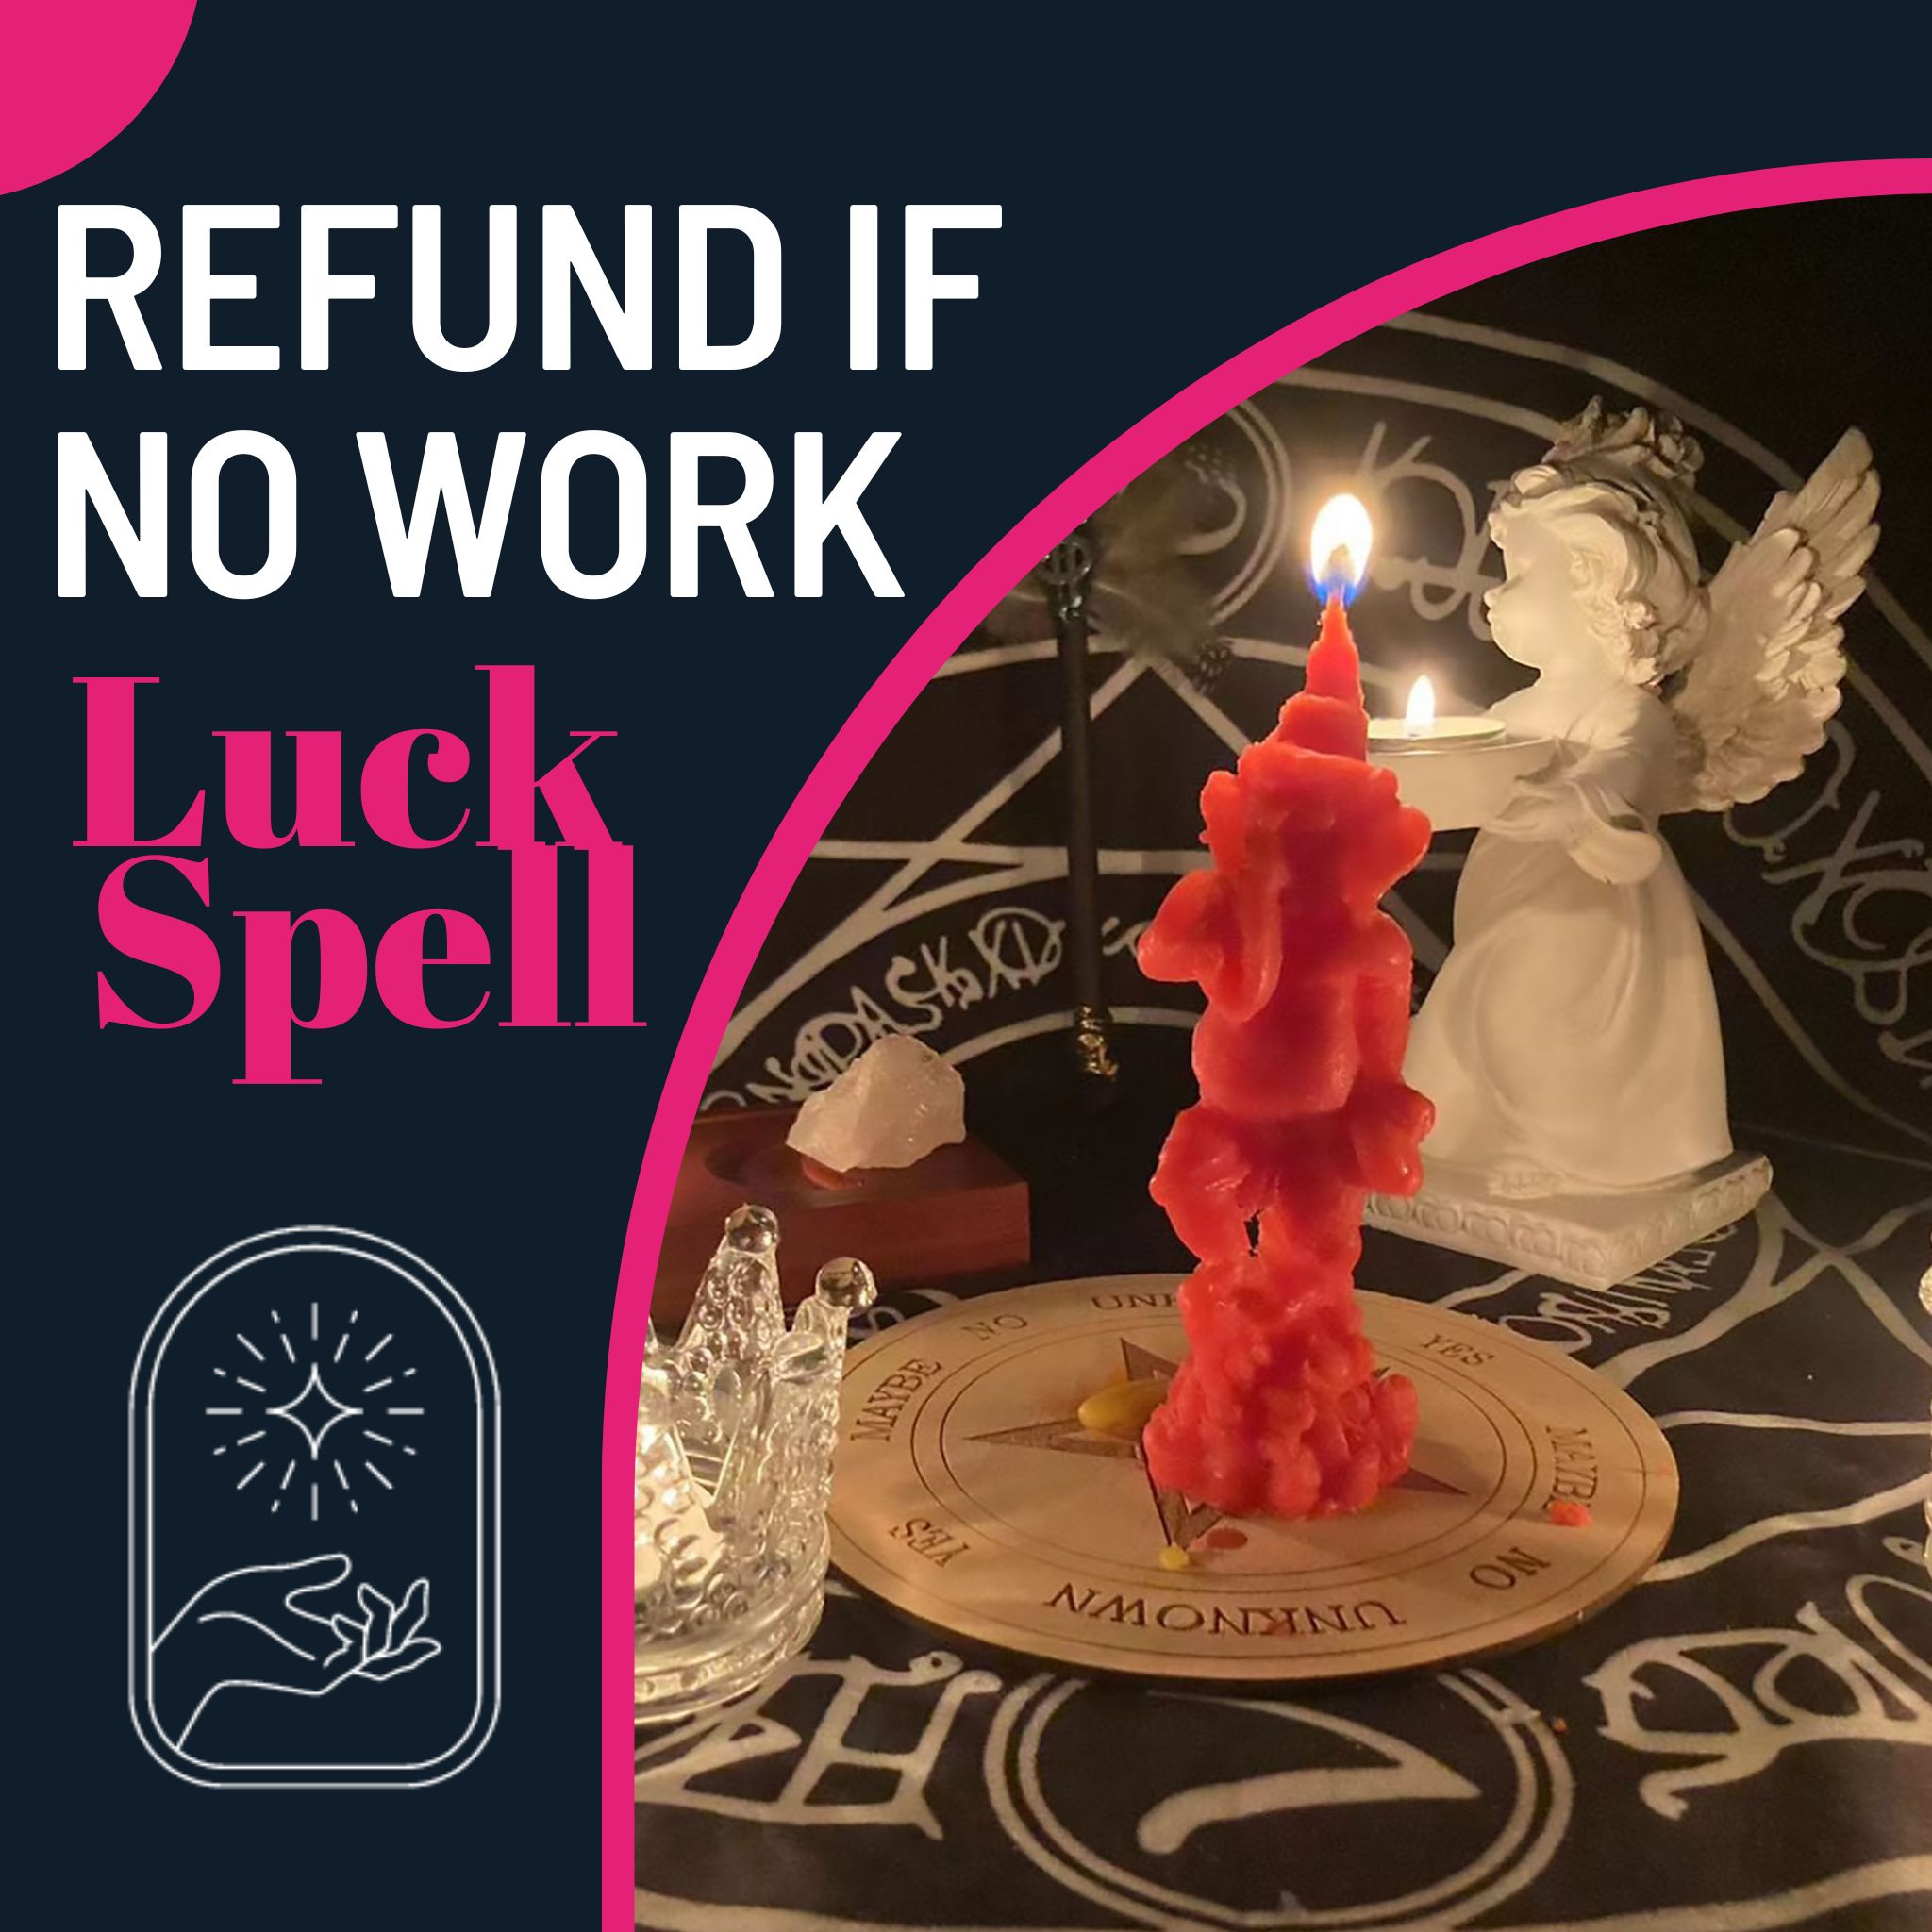 Lady Luck Spell【Refund if No Work】